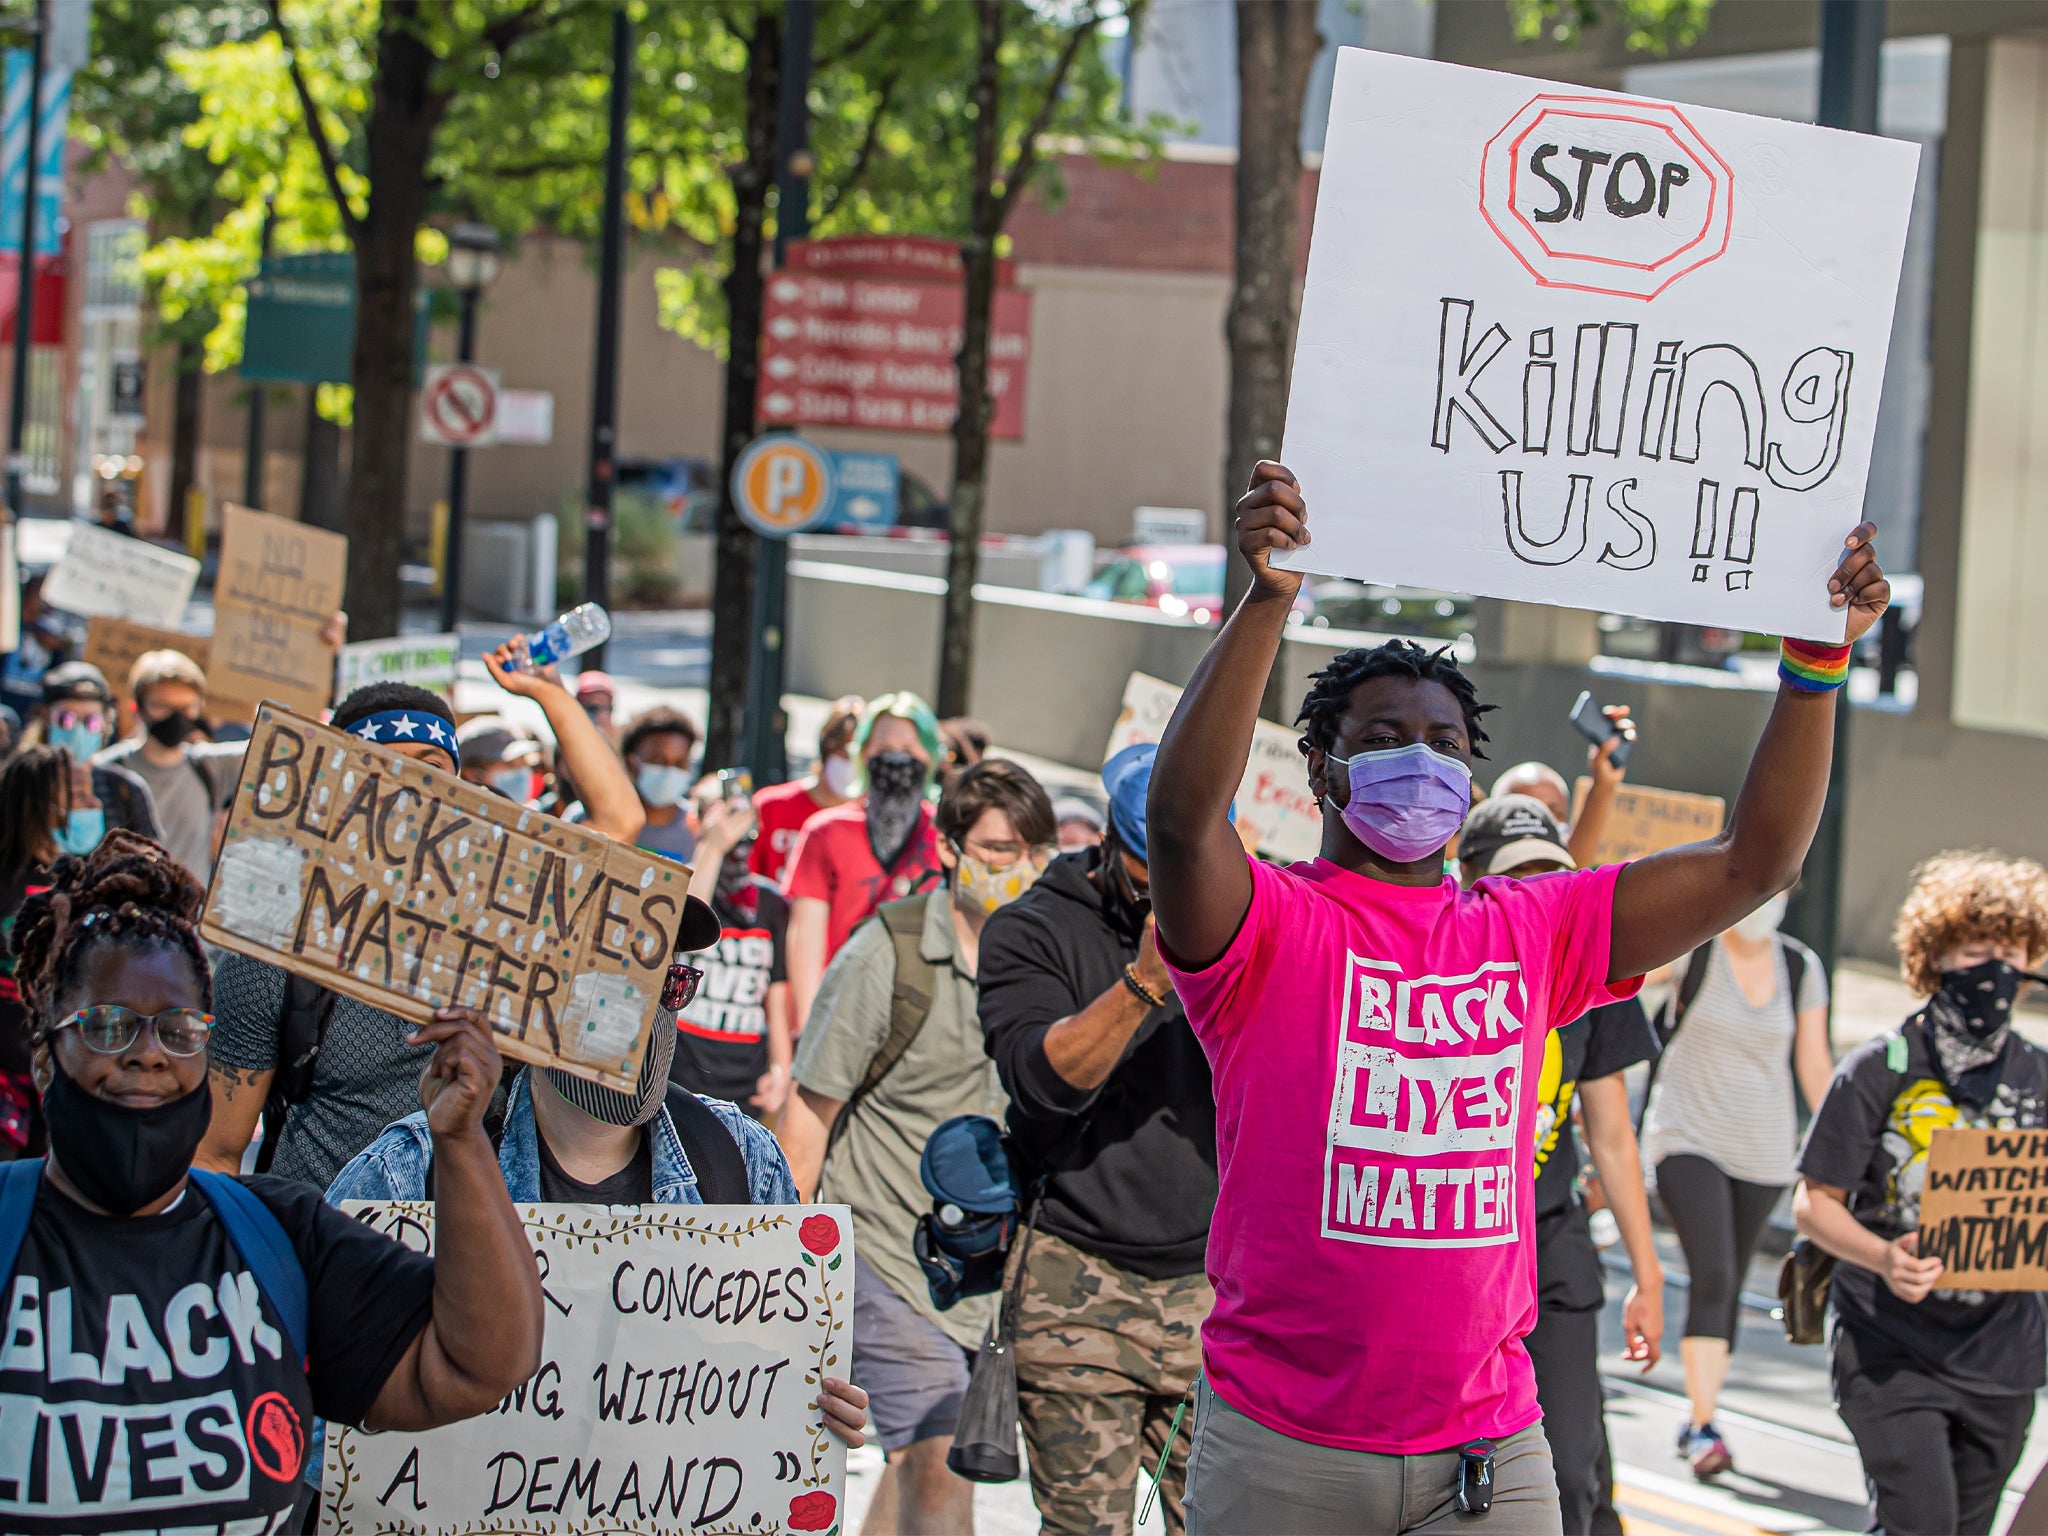 Black Lives Matter demonstrators march through the streets in the wake of the Atlanta Police deadly shooting of Rayshard Brooks in Atlanta, Georgia, 16 June 2020